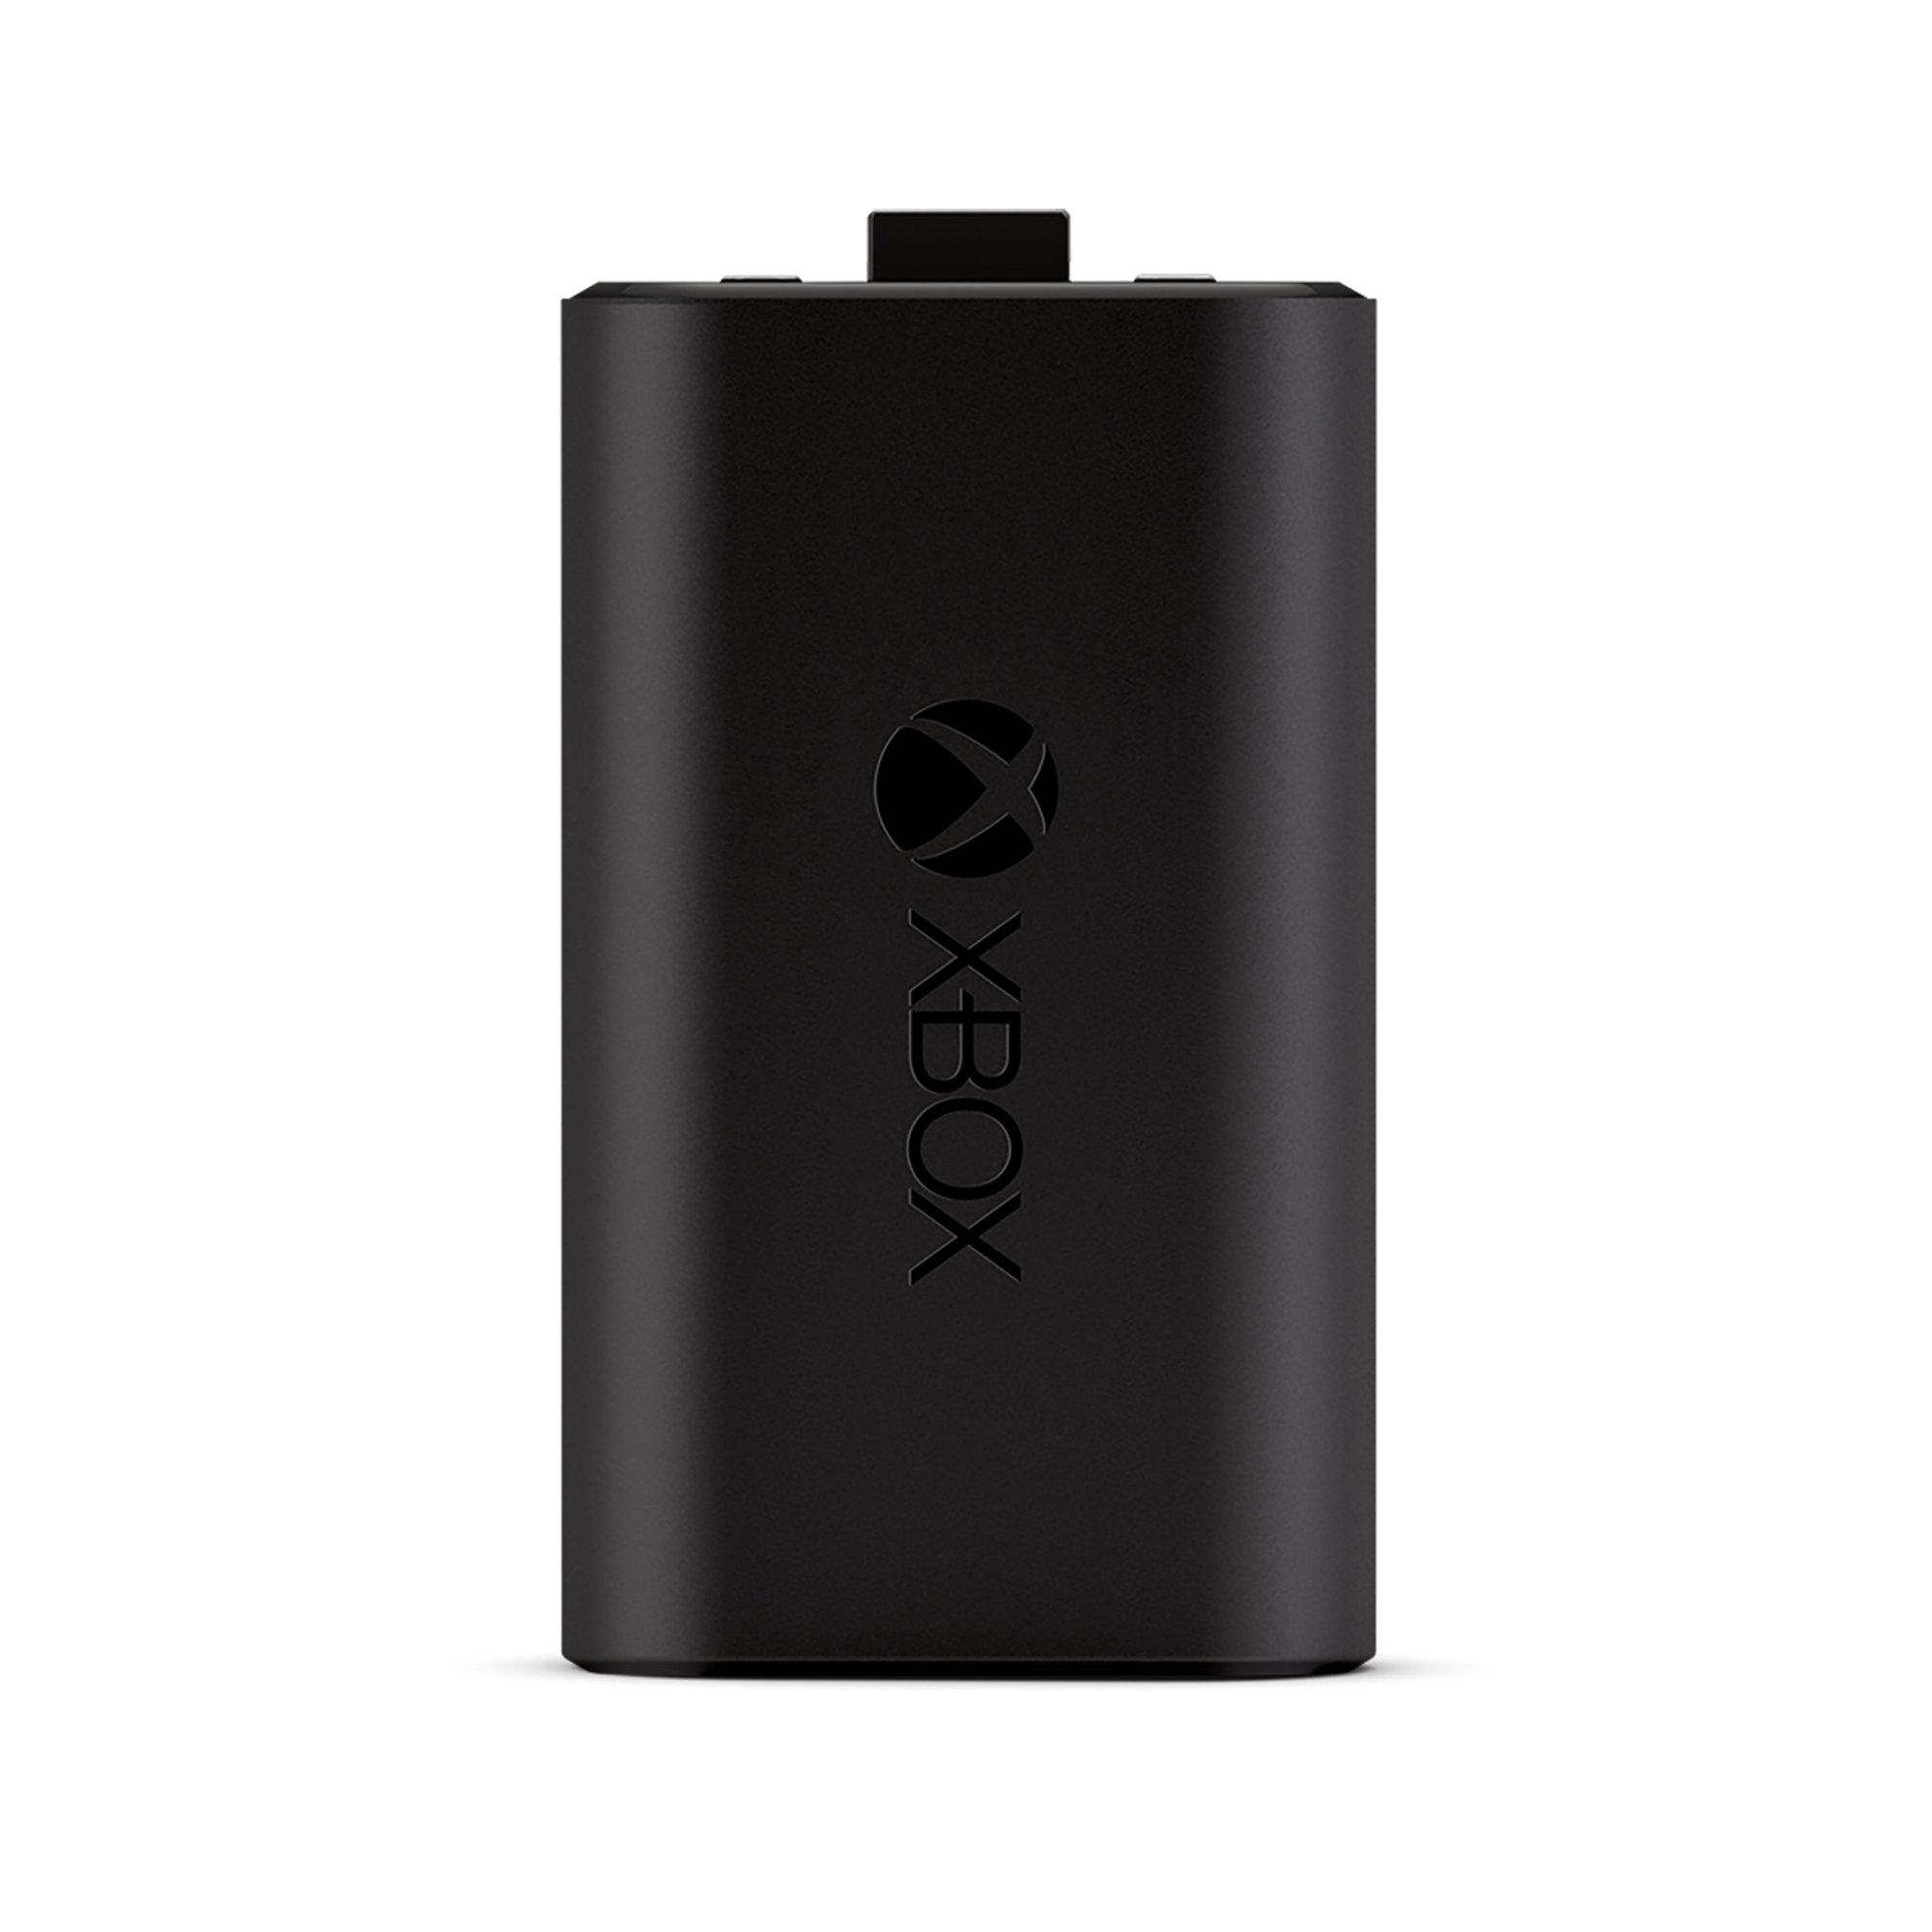 gamestop xbox one rechargeable battery pack